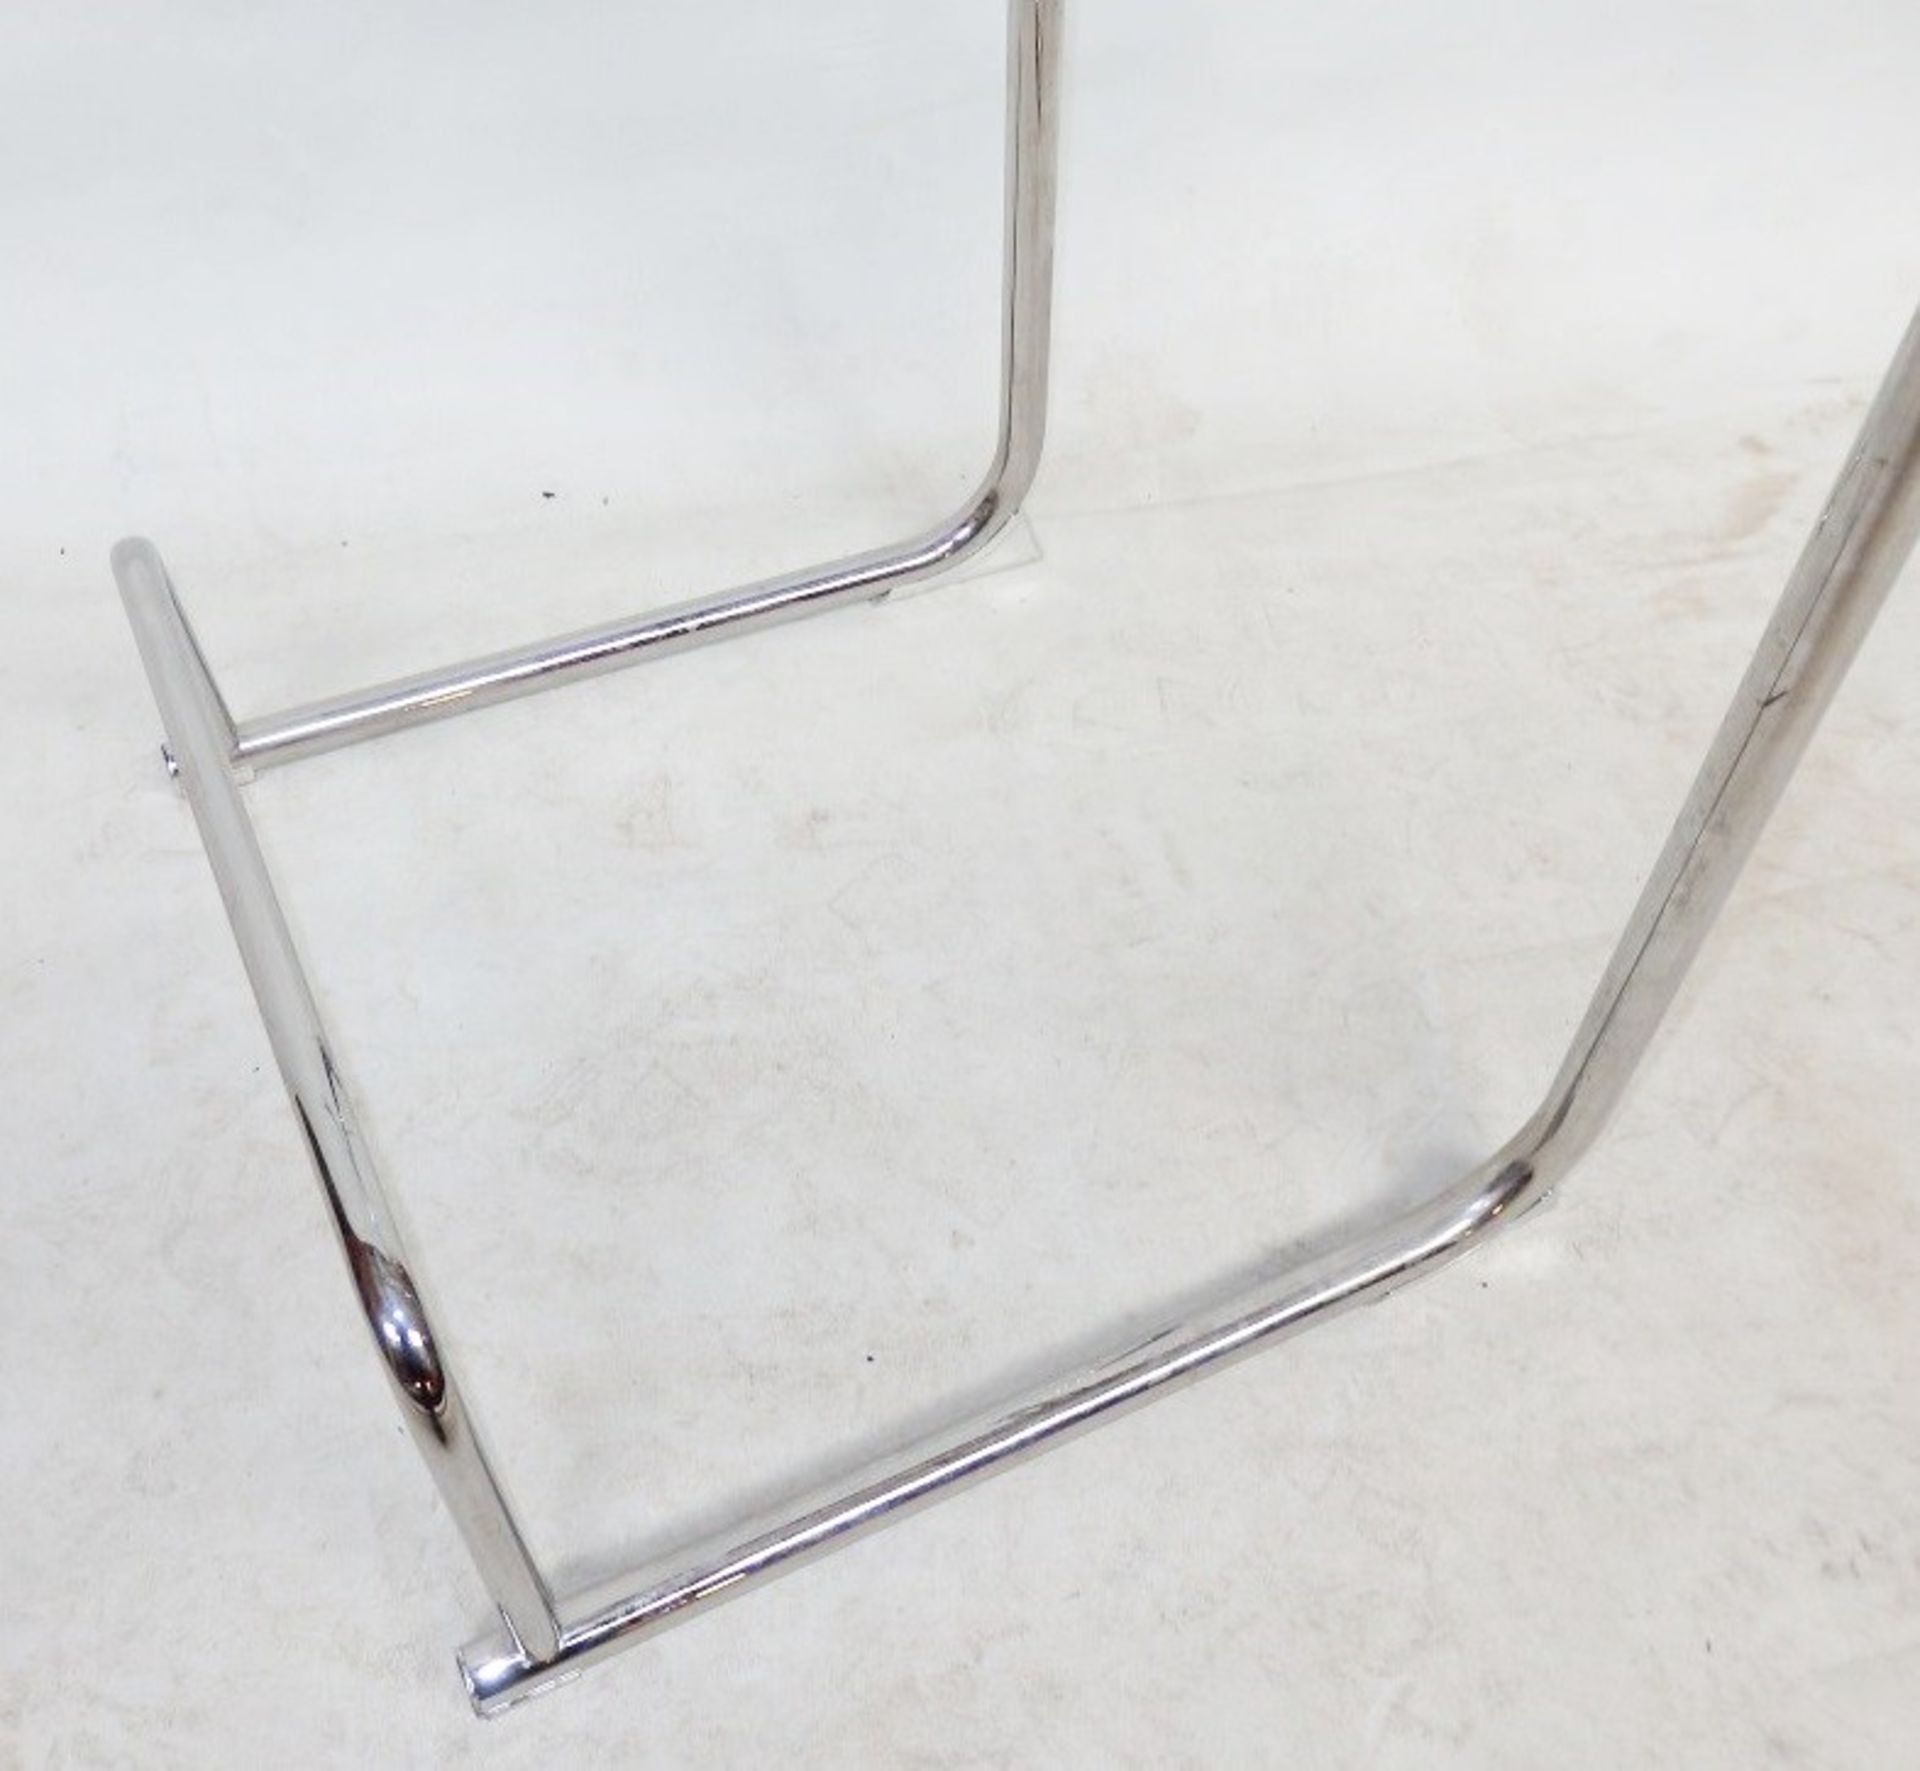 1 x Modern Designer Chair - Features A Sturdy Metal Tube Frame and Clear Perspex Seat - - Image 6 of 6